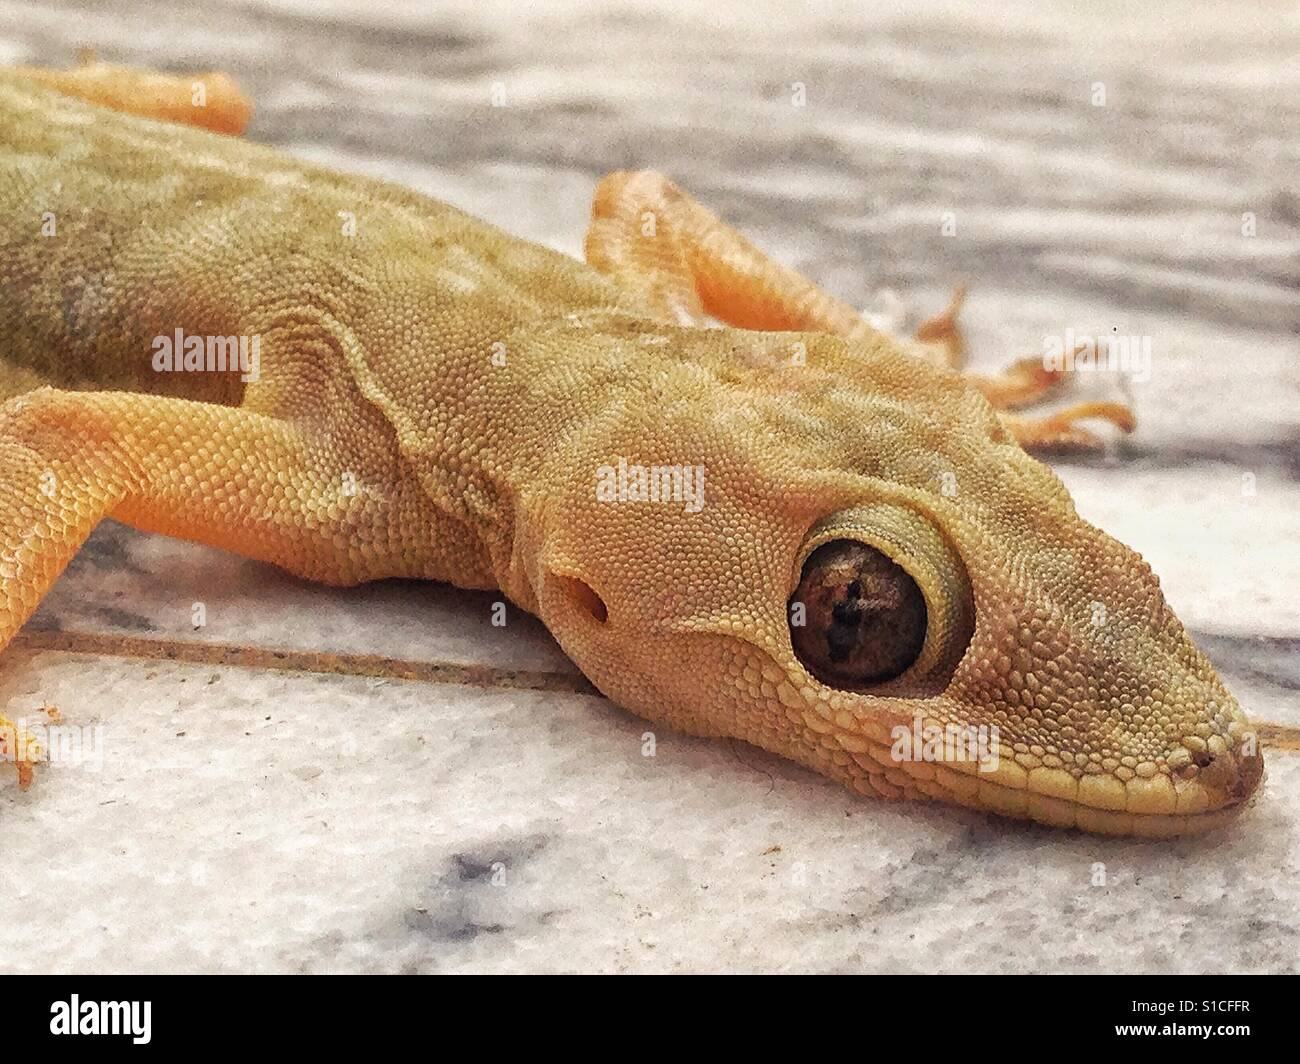 Lizard stares at you with its reptilian eye Stock Photo